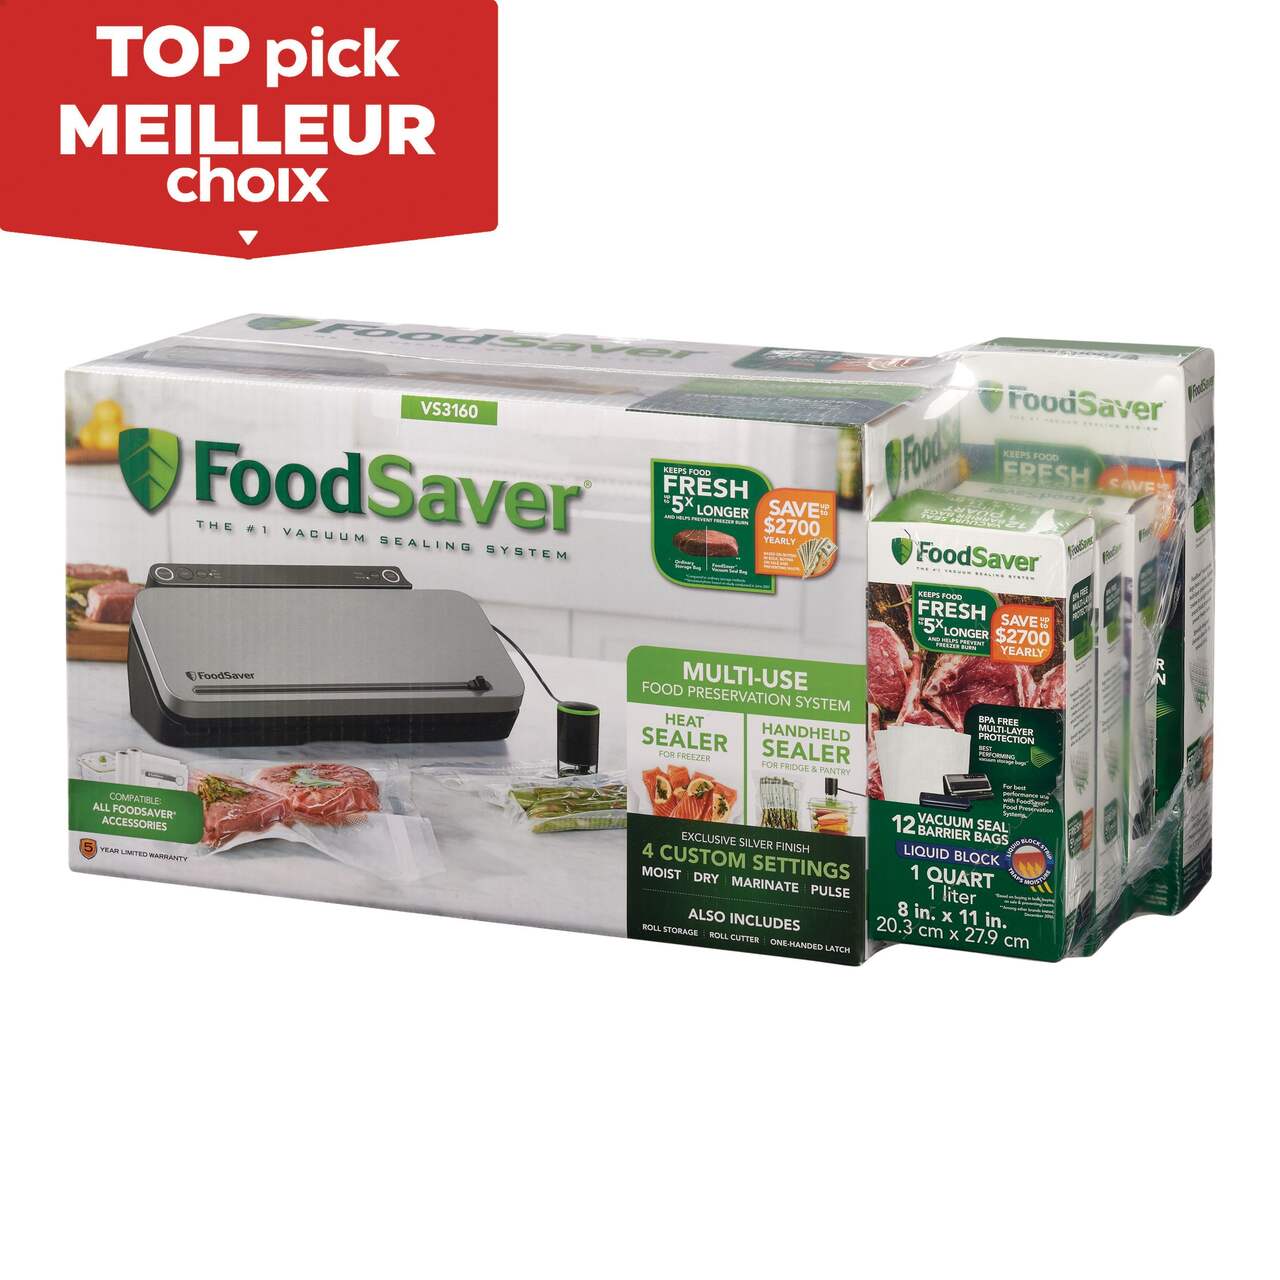 https://media-www.canadiantire.ca/product/living/kitchen/kitchen-appliances/4990021/foodsavera-vacuum-sealer-4-heat-seal-rolls-bags-7a5918a7-3c95-404e-aba5-89647505fdca-jpgrendition.jpg?imdensity=1&imwidth=640&impolicy=mZoom